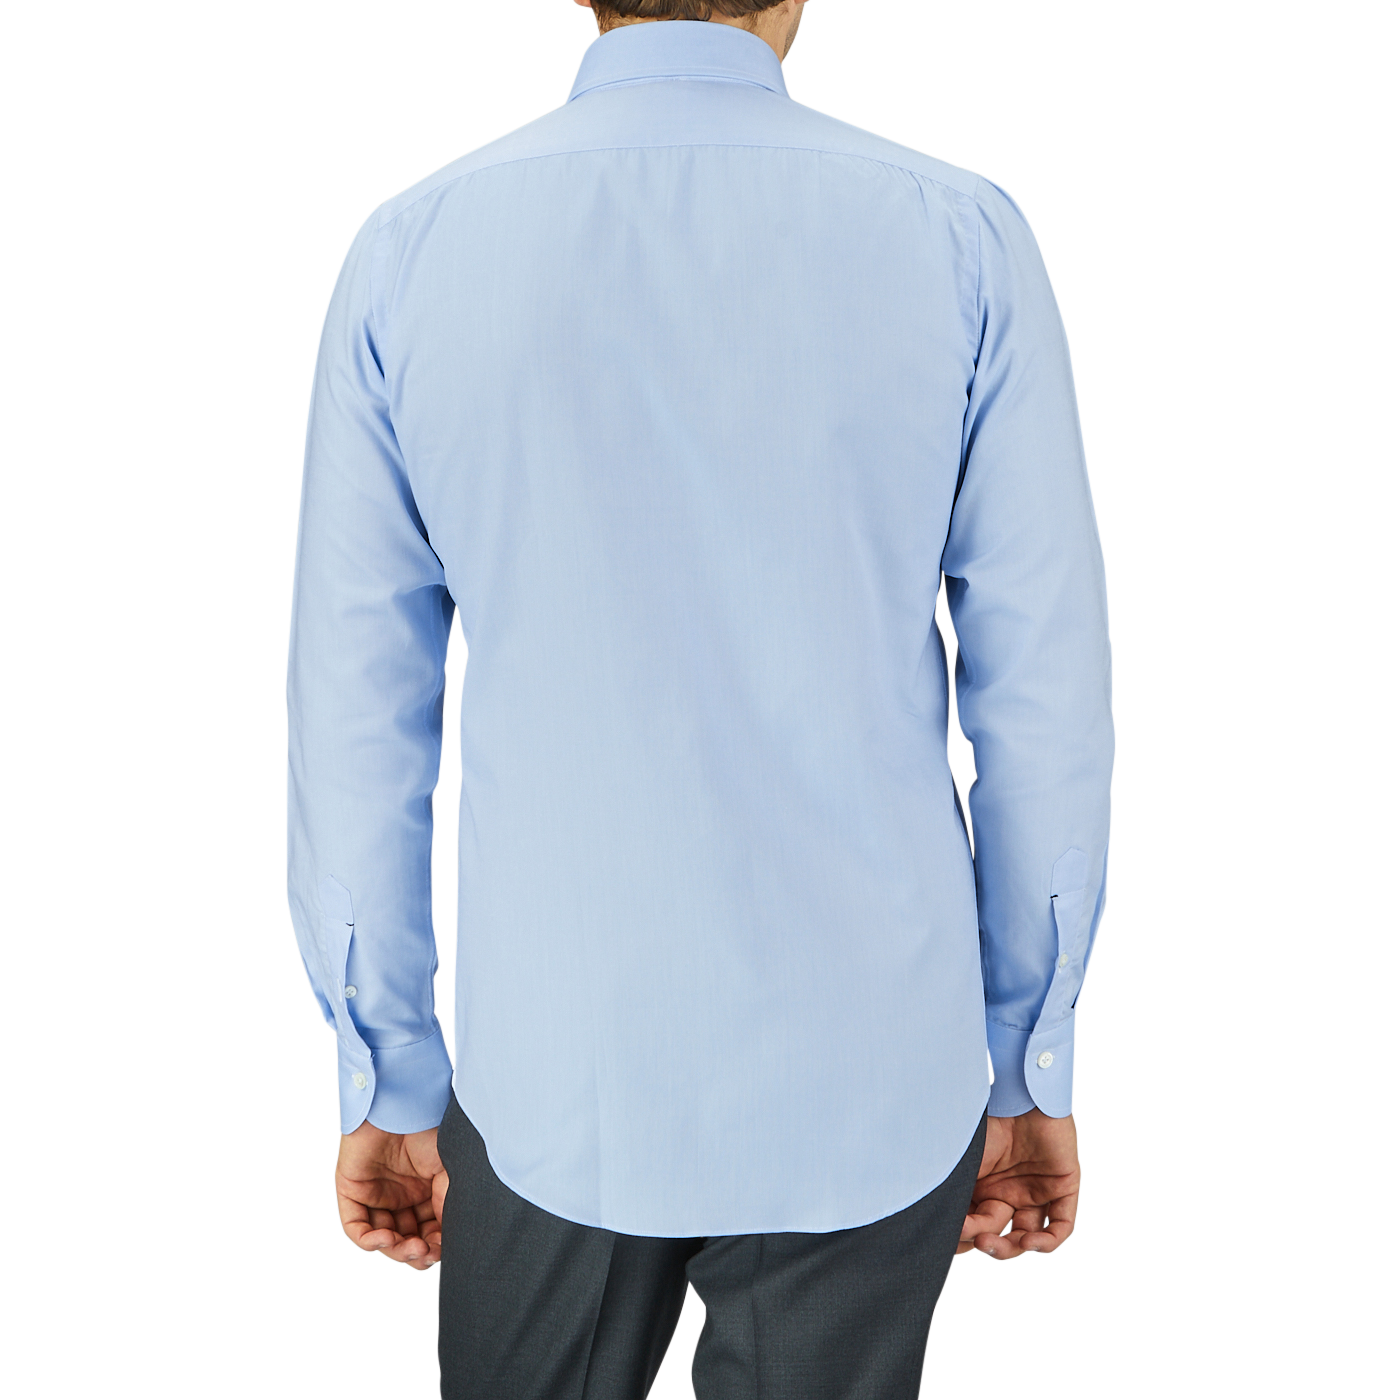 Rear view of a man wearing a Mazzarelli Light Blue Royal Oxford BD Slim Shirt and dark trousers, standing against a gray background.